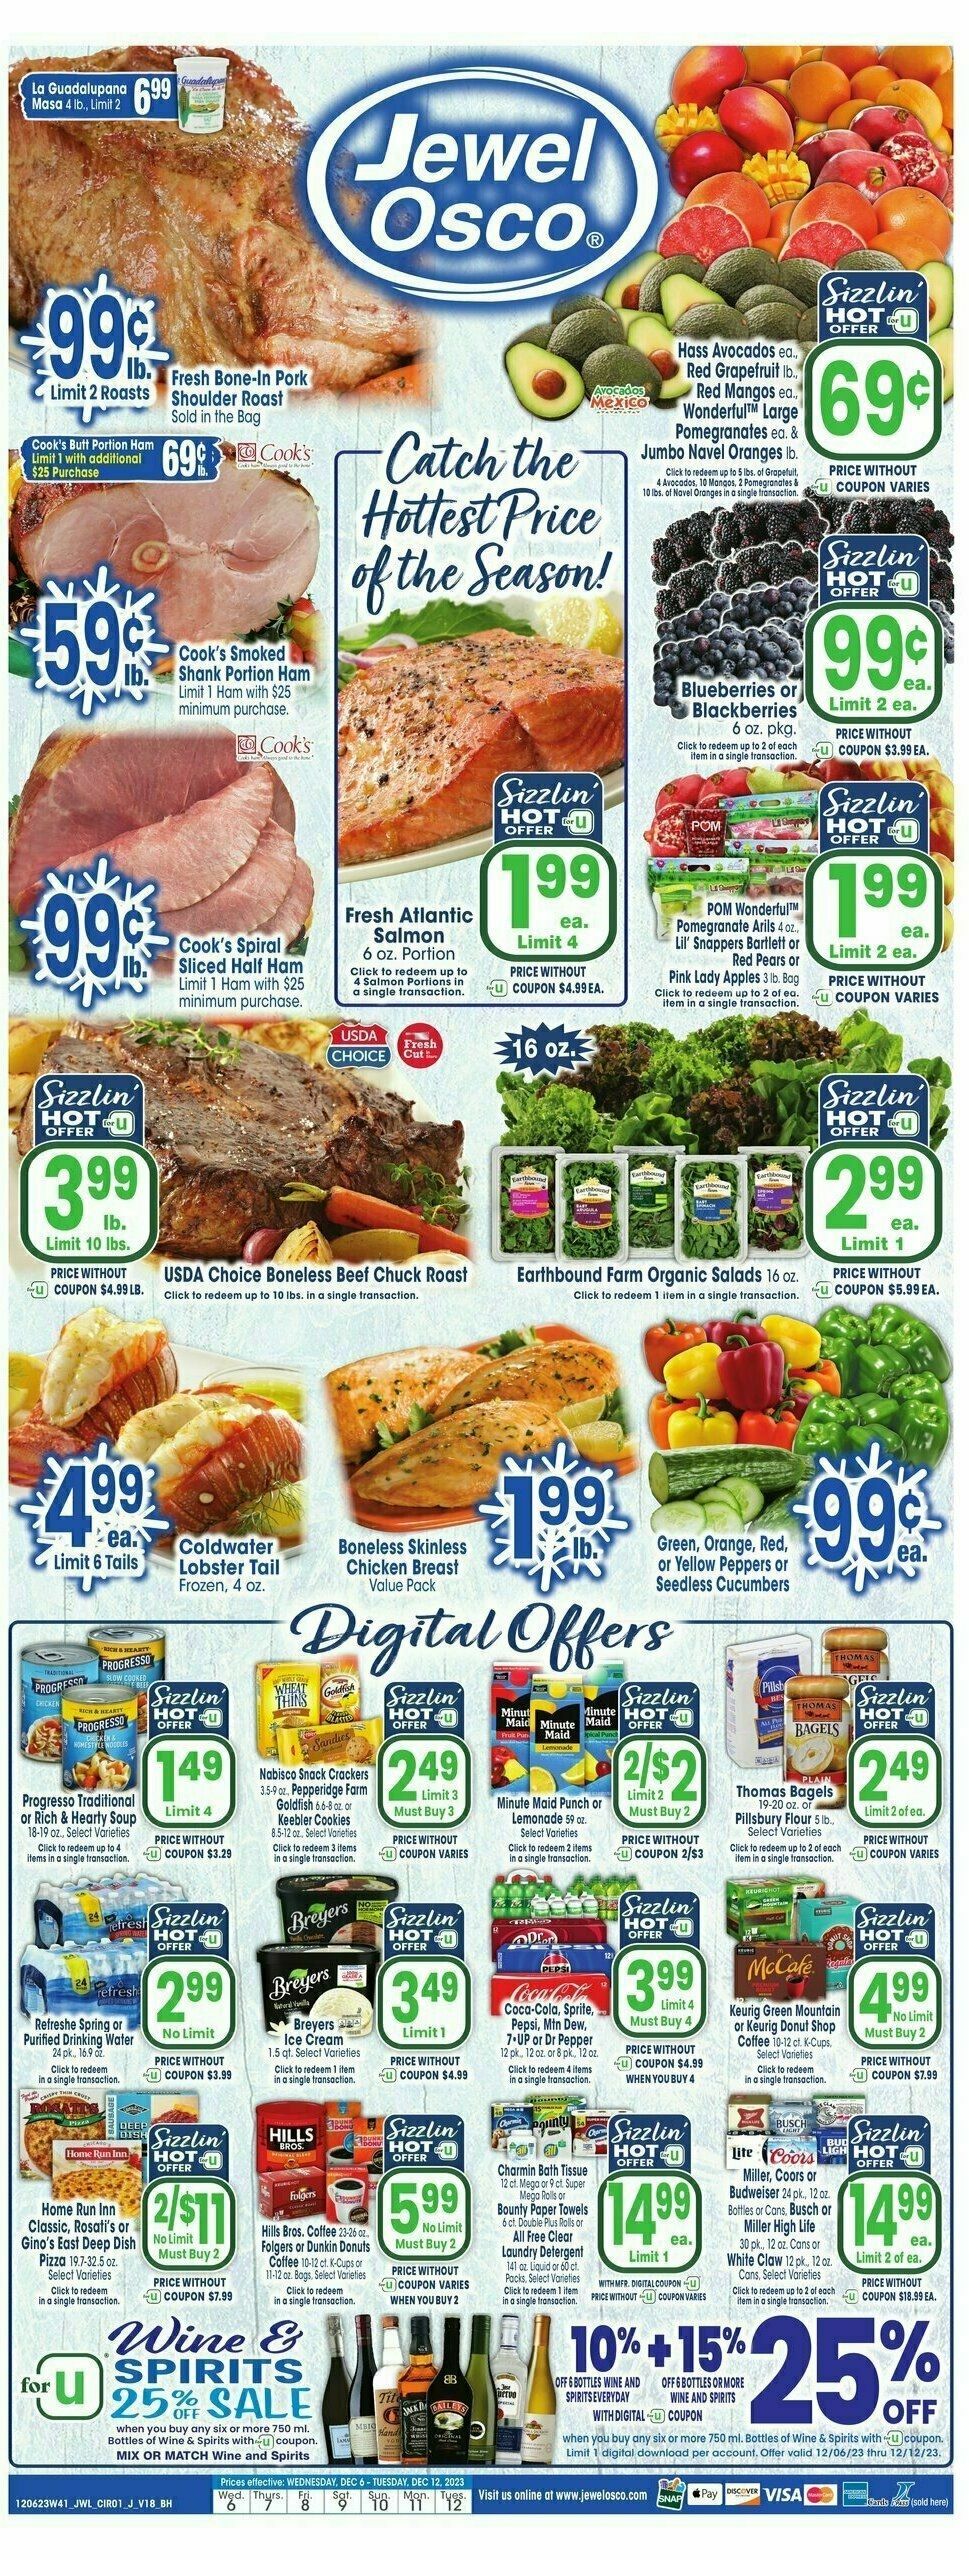 Jewel Osco Weekly Ad from December 6